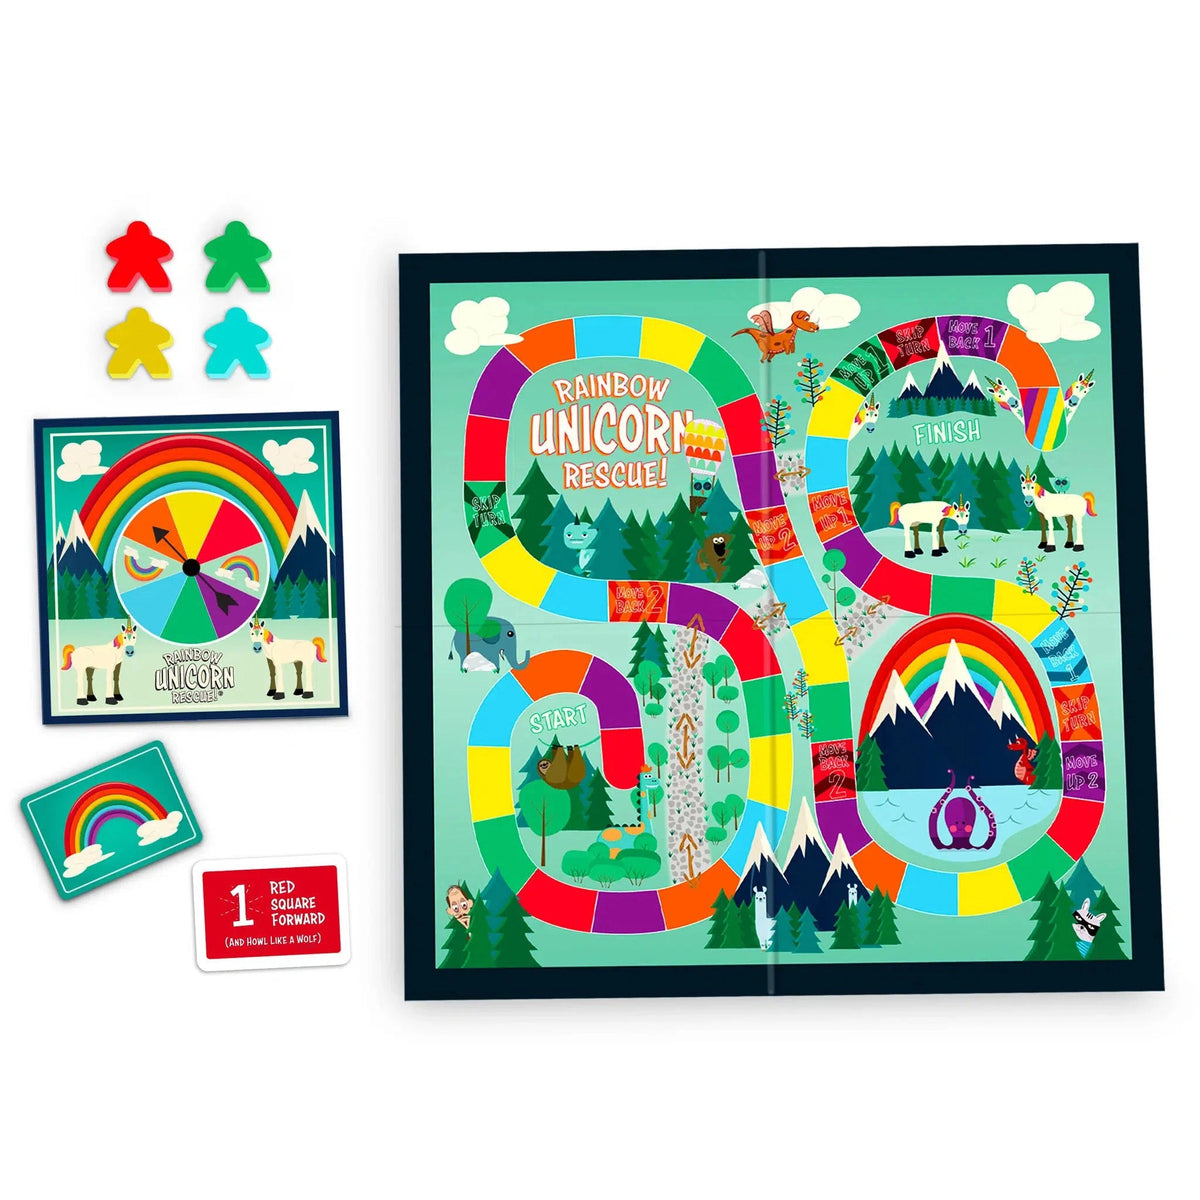 Front view of the game board for Rainbow Unicorn Rescue. The pieces, spinner, and cards are laying beside the game board.